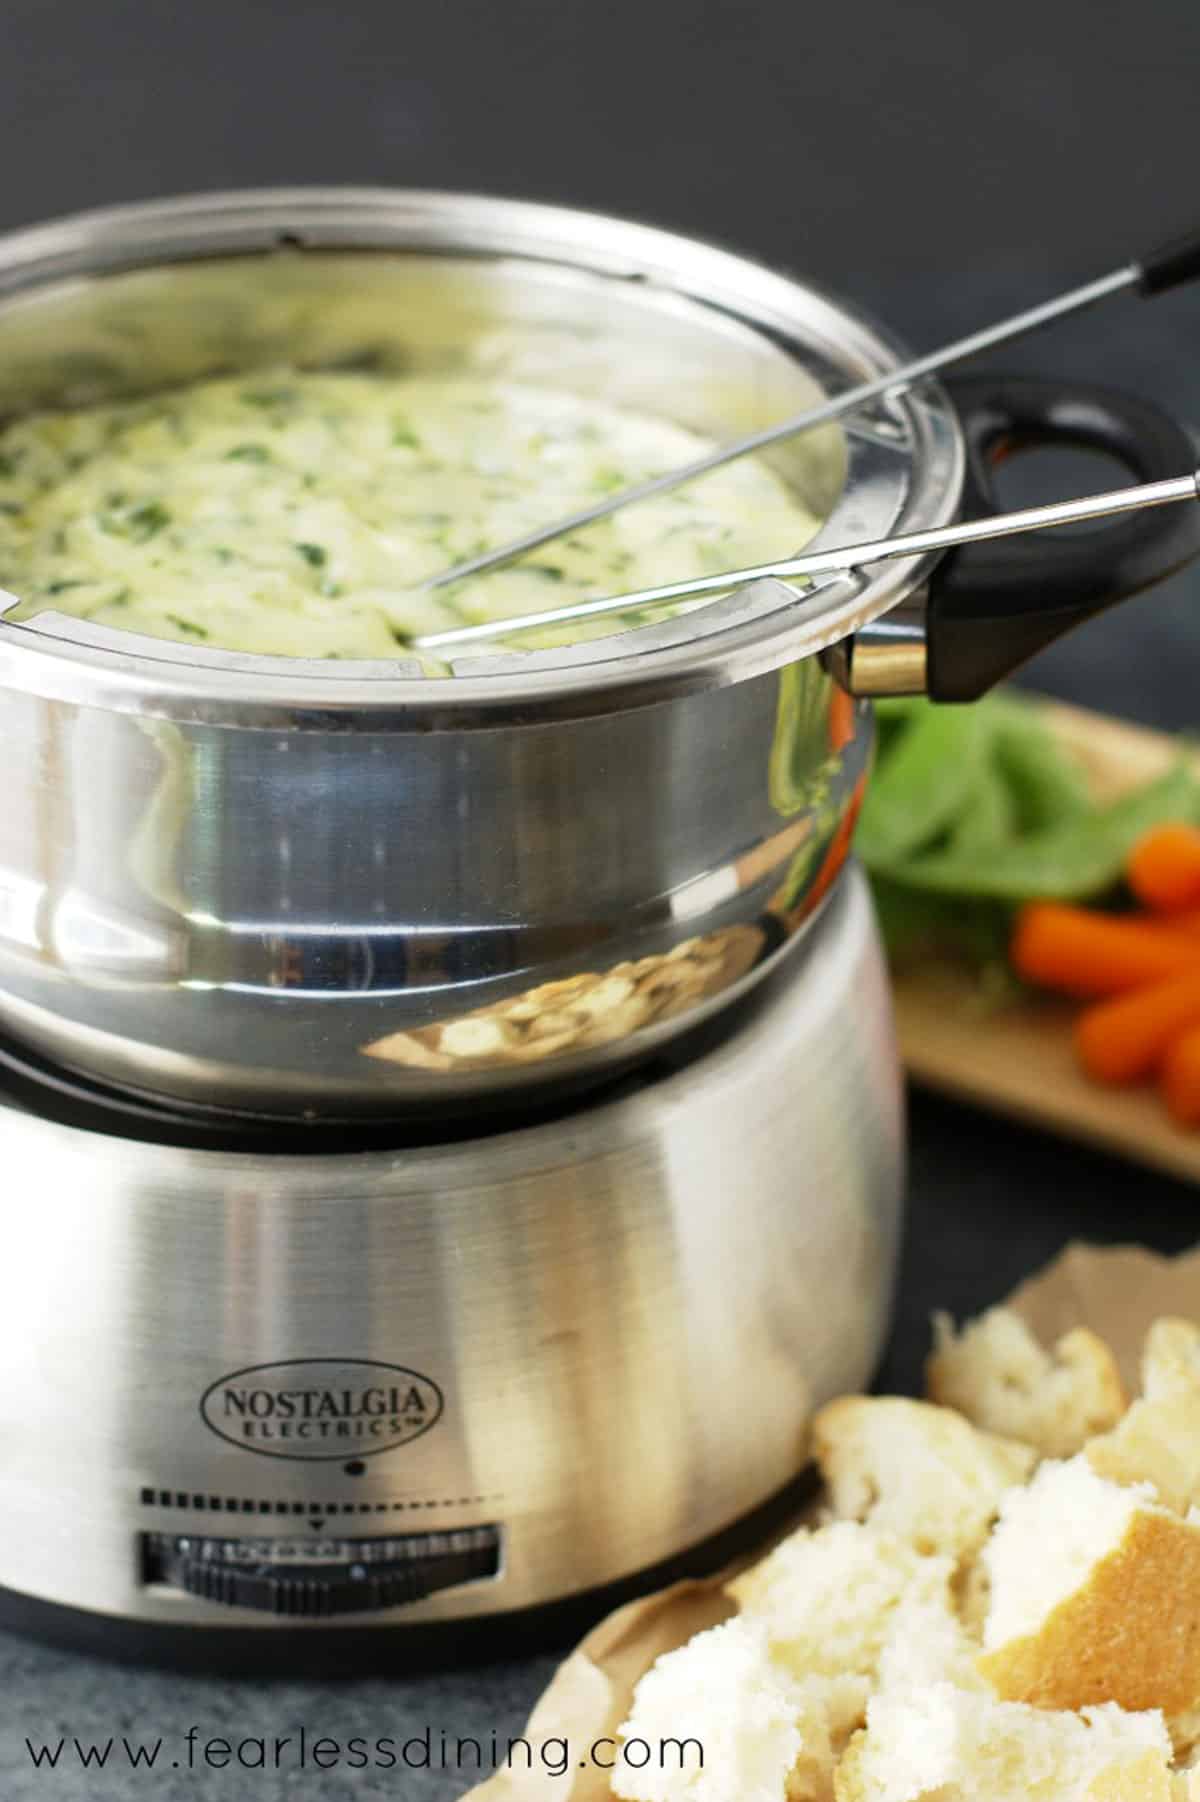 A fondue pot full of melty cheese.